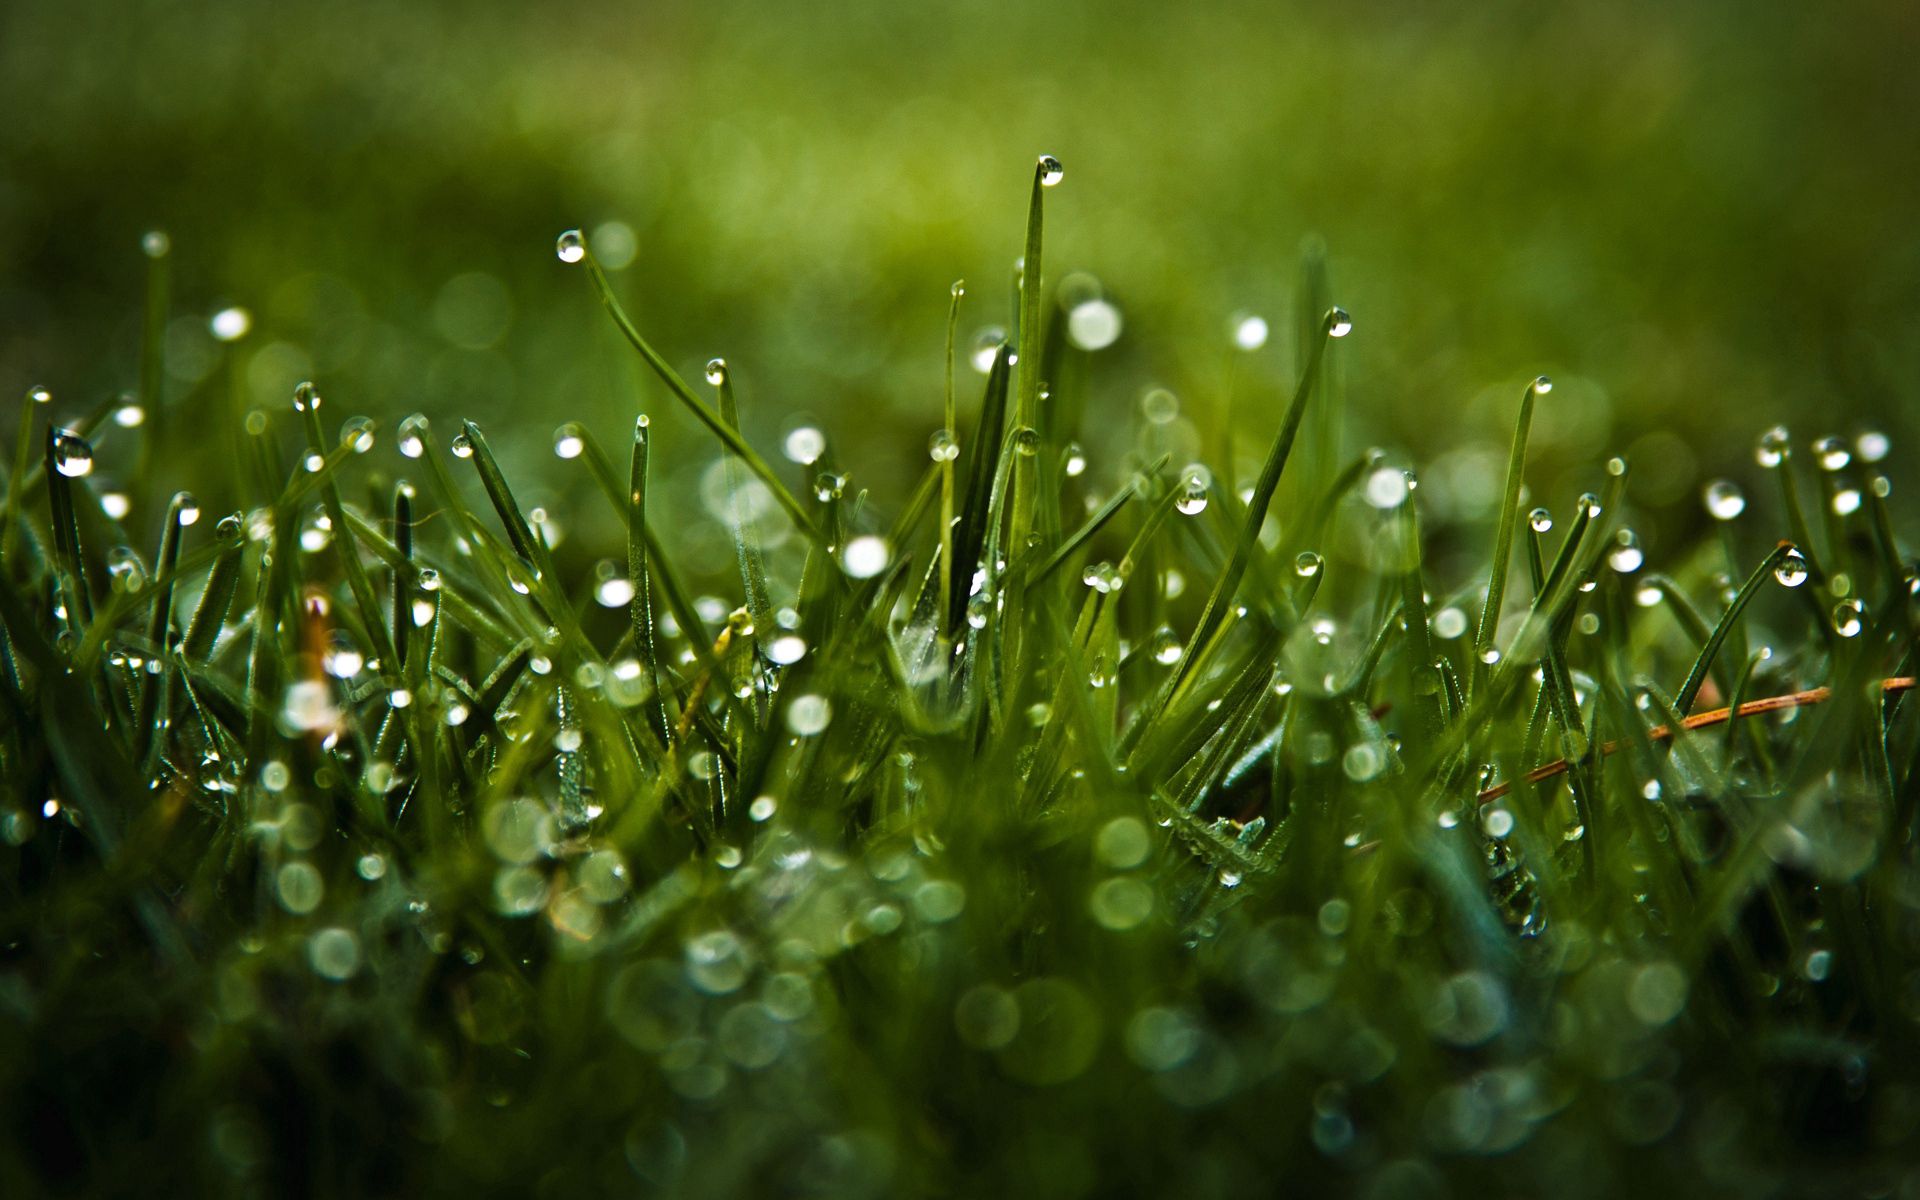 150030 download wallpaper grass, drops, macro, glare, dew screensavers and pictures for free